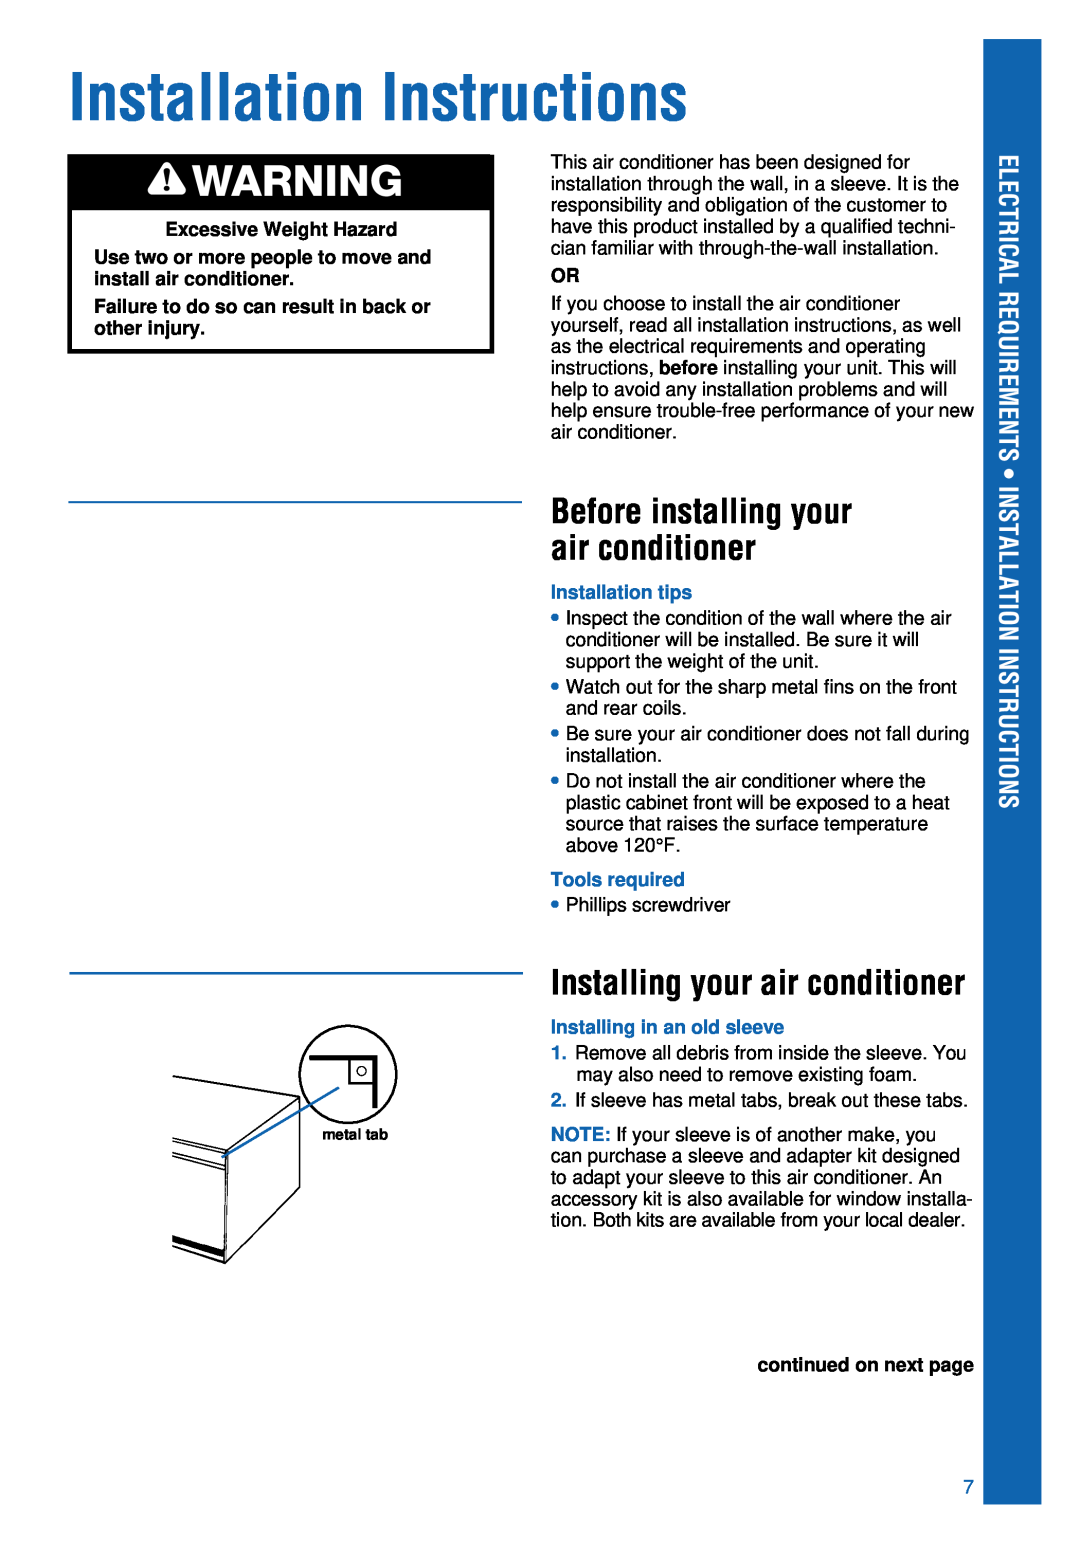 Whirlpool ACU124PK0 Installation Instructions, Installing your air conditioner, Before installing your air conditioner 